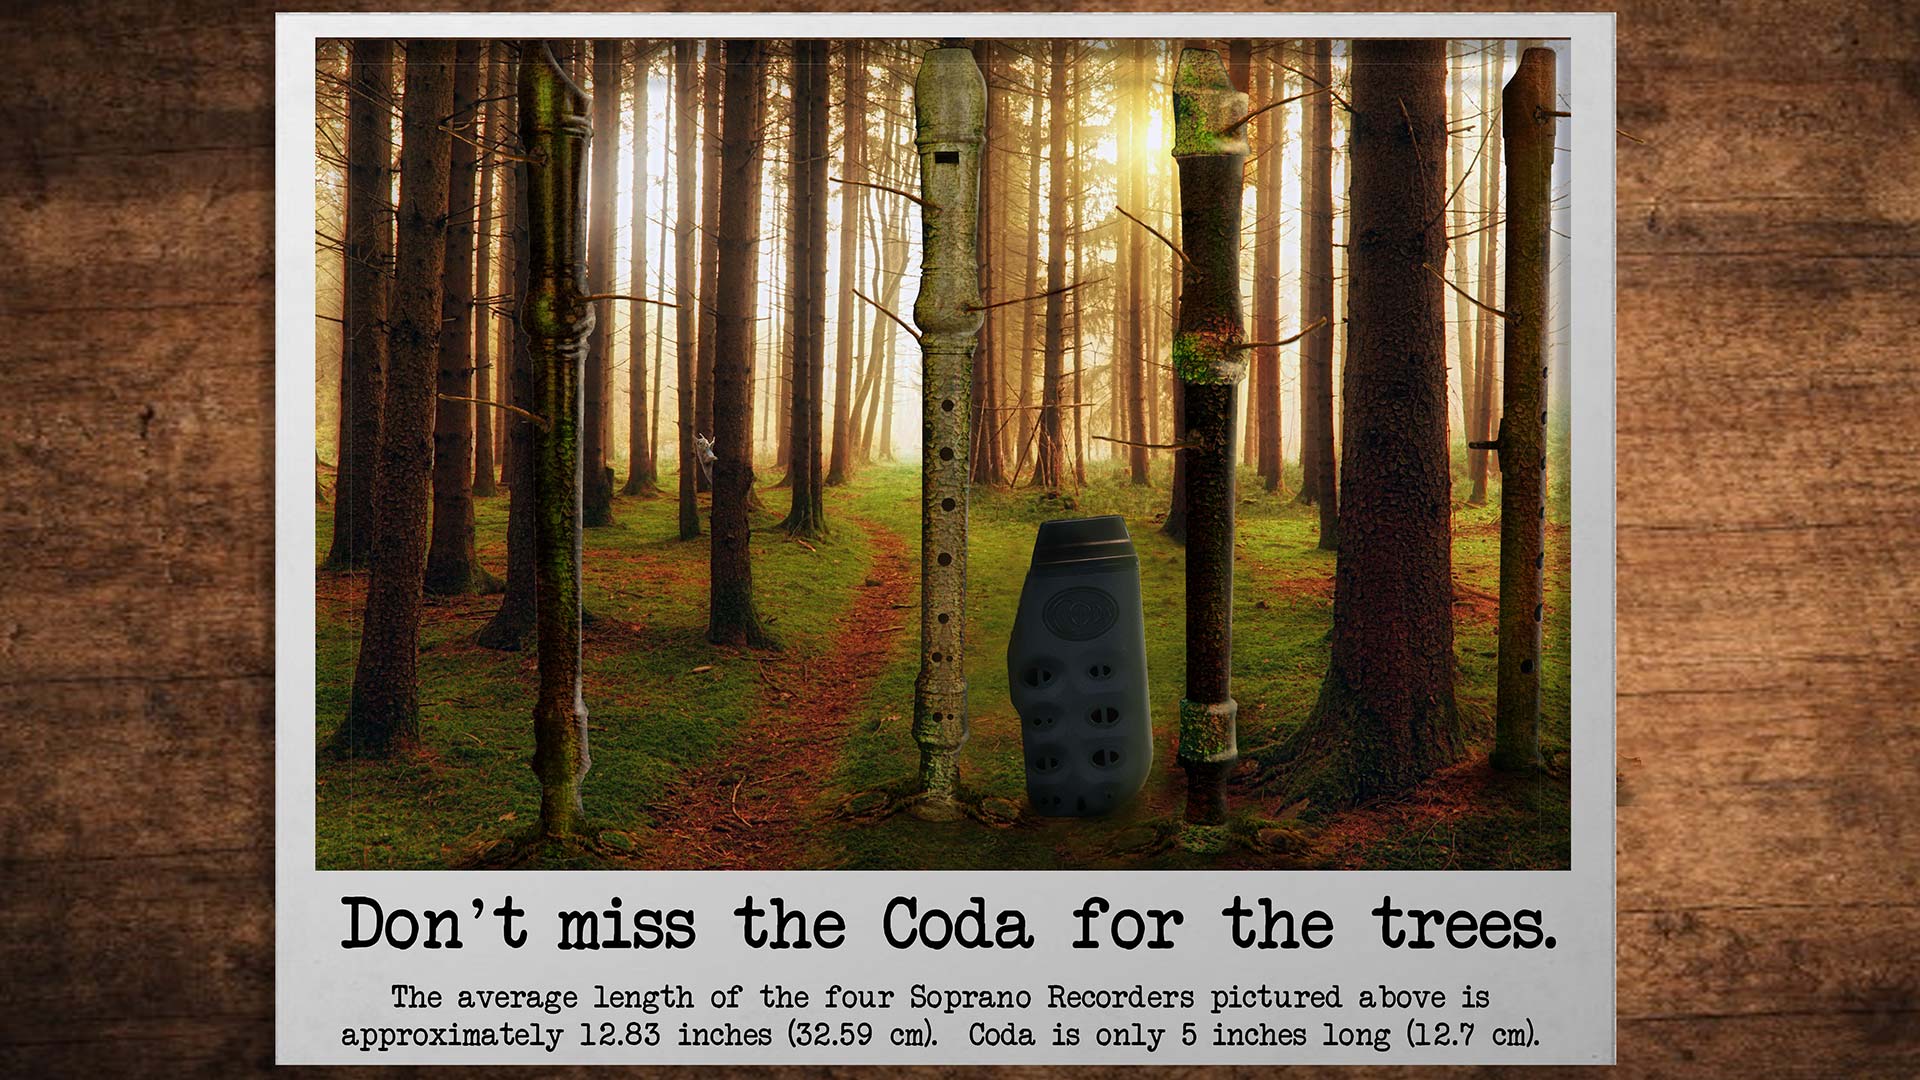 Don't miss the Coda for the trees!